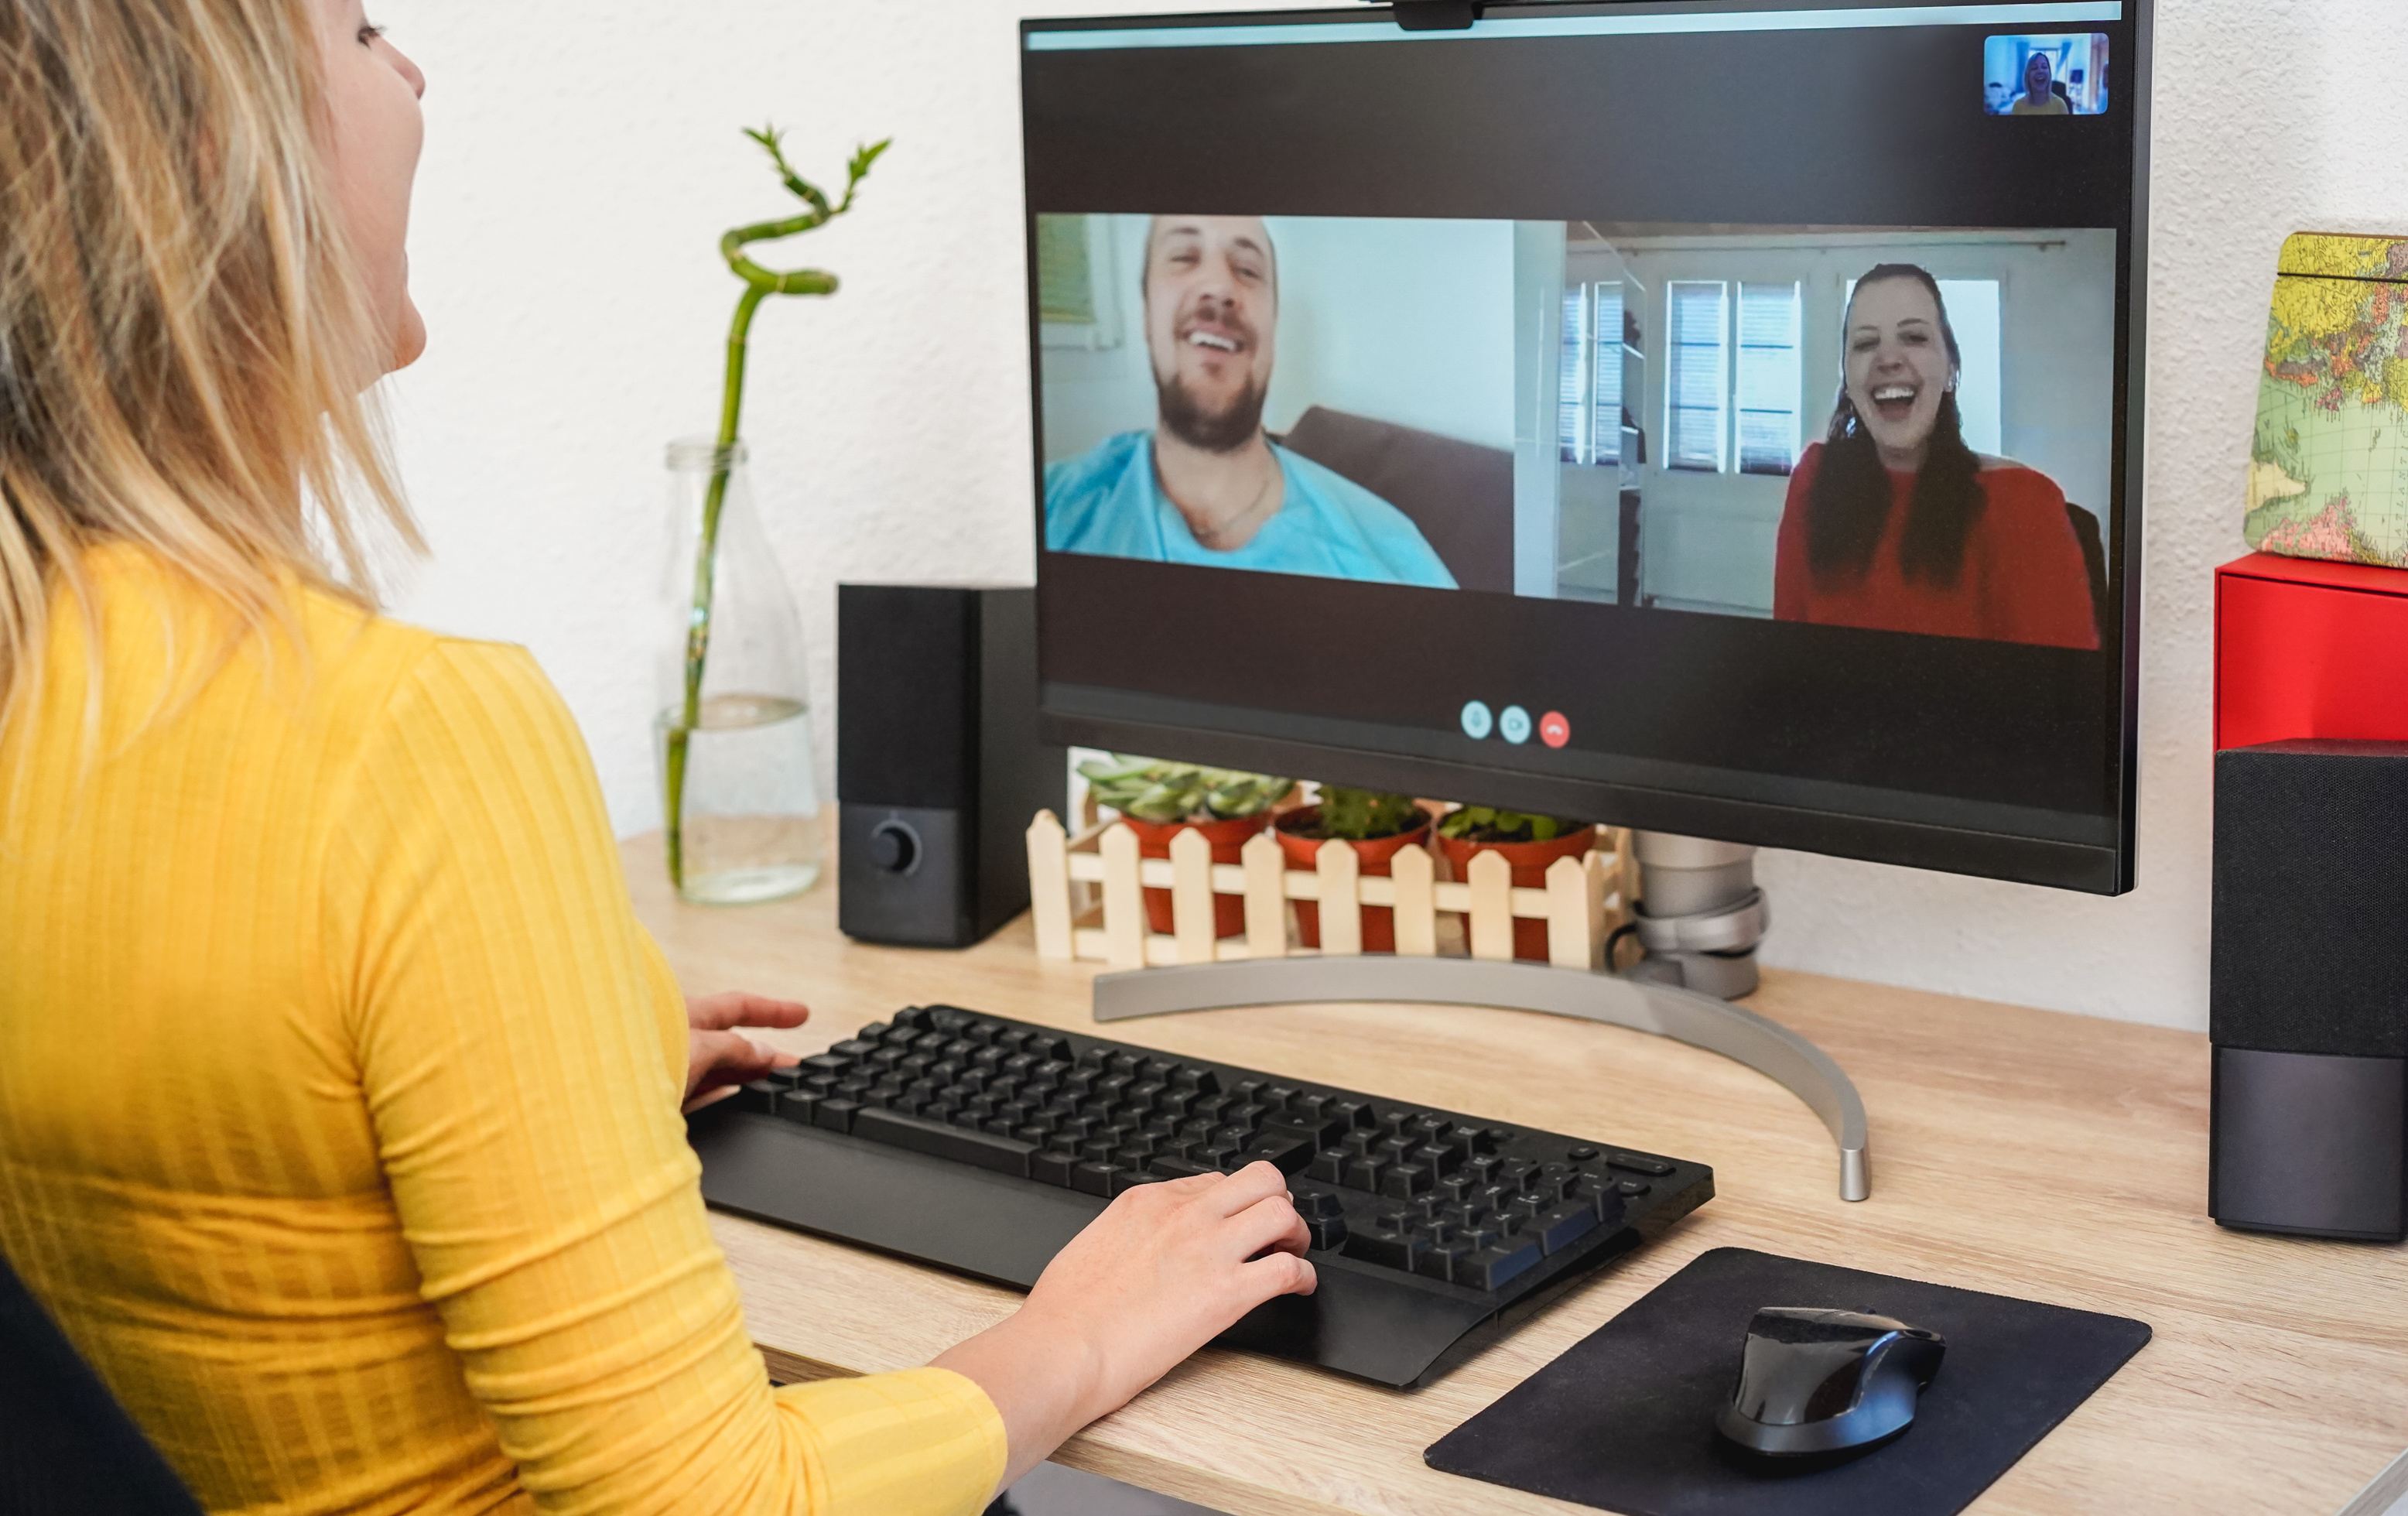 The Best Online Games To Play With Your Friends Over Zoom Video Calls